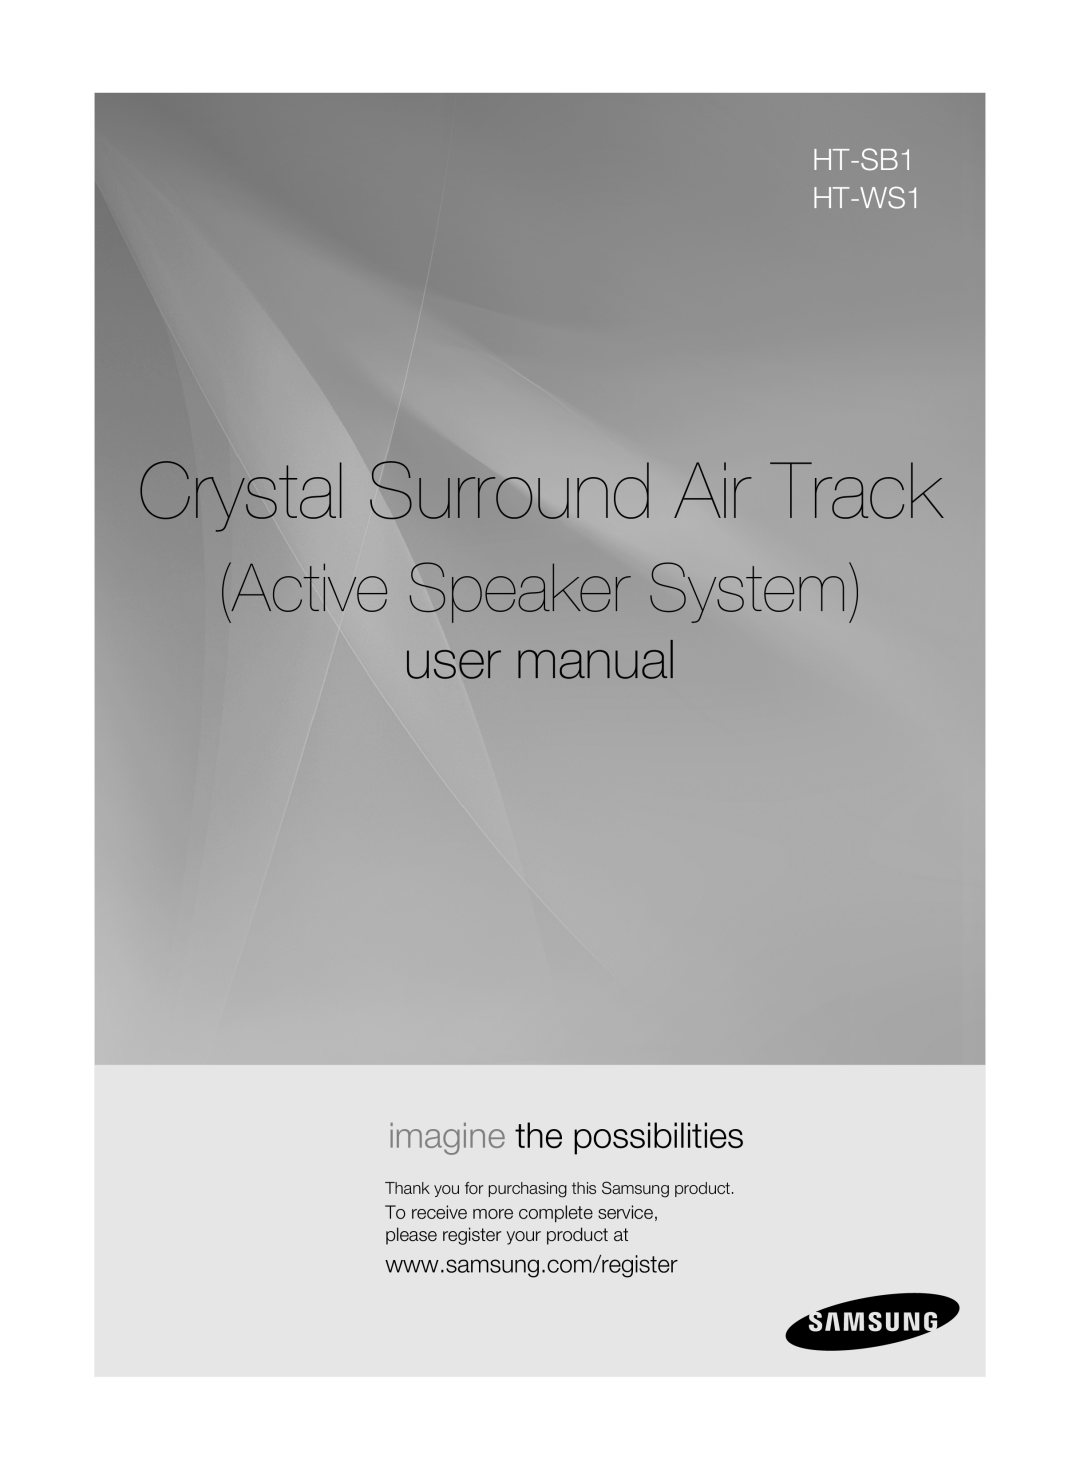 Samsung AH68-02184F user manual Crystal Surround Air Track, Active Speaker System, imagine the possibilities 